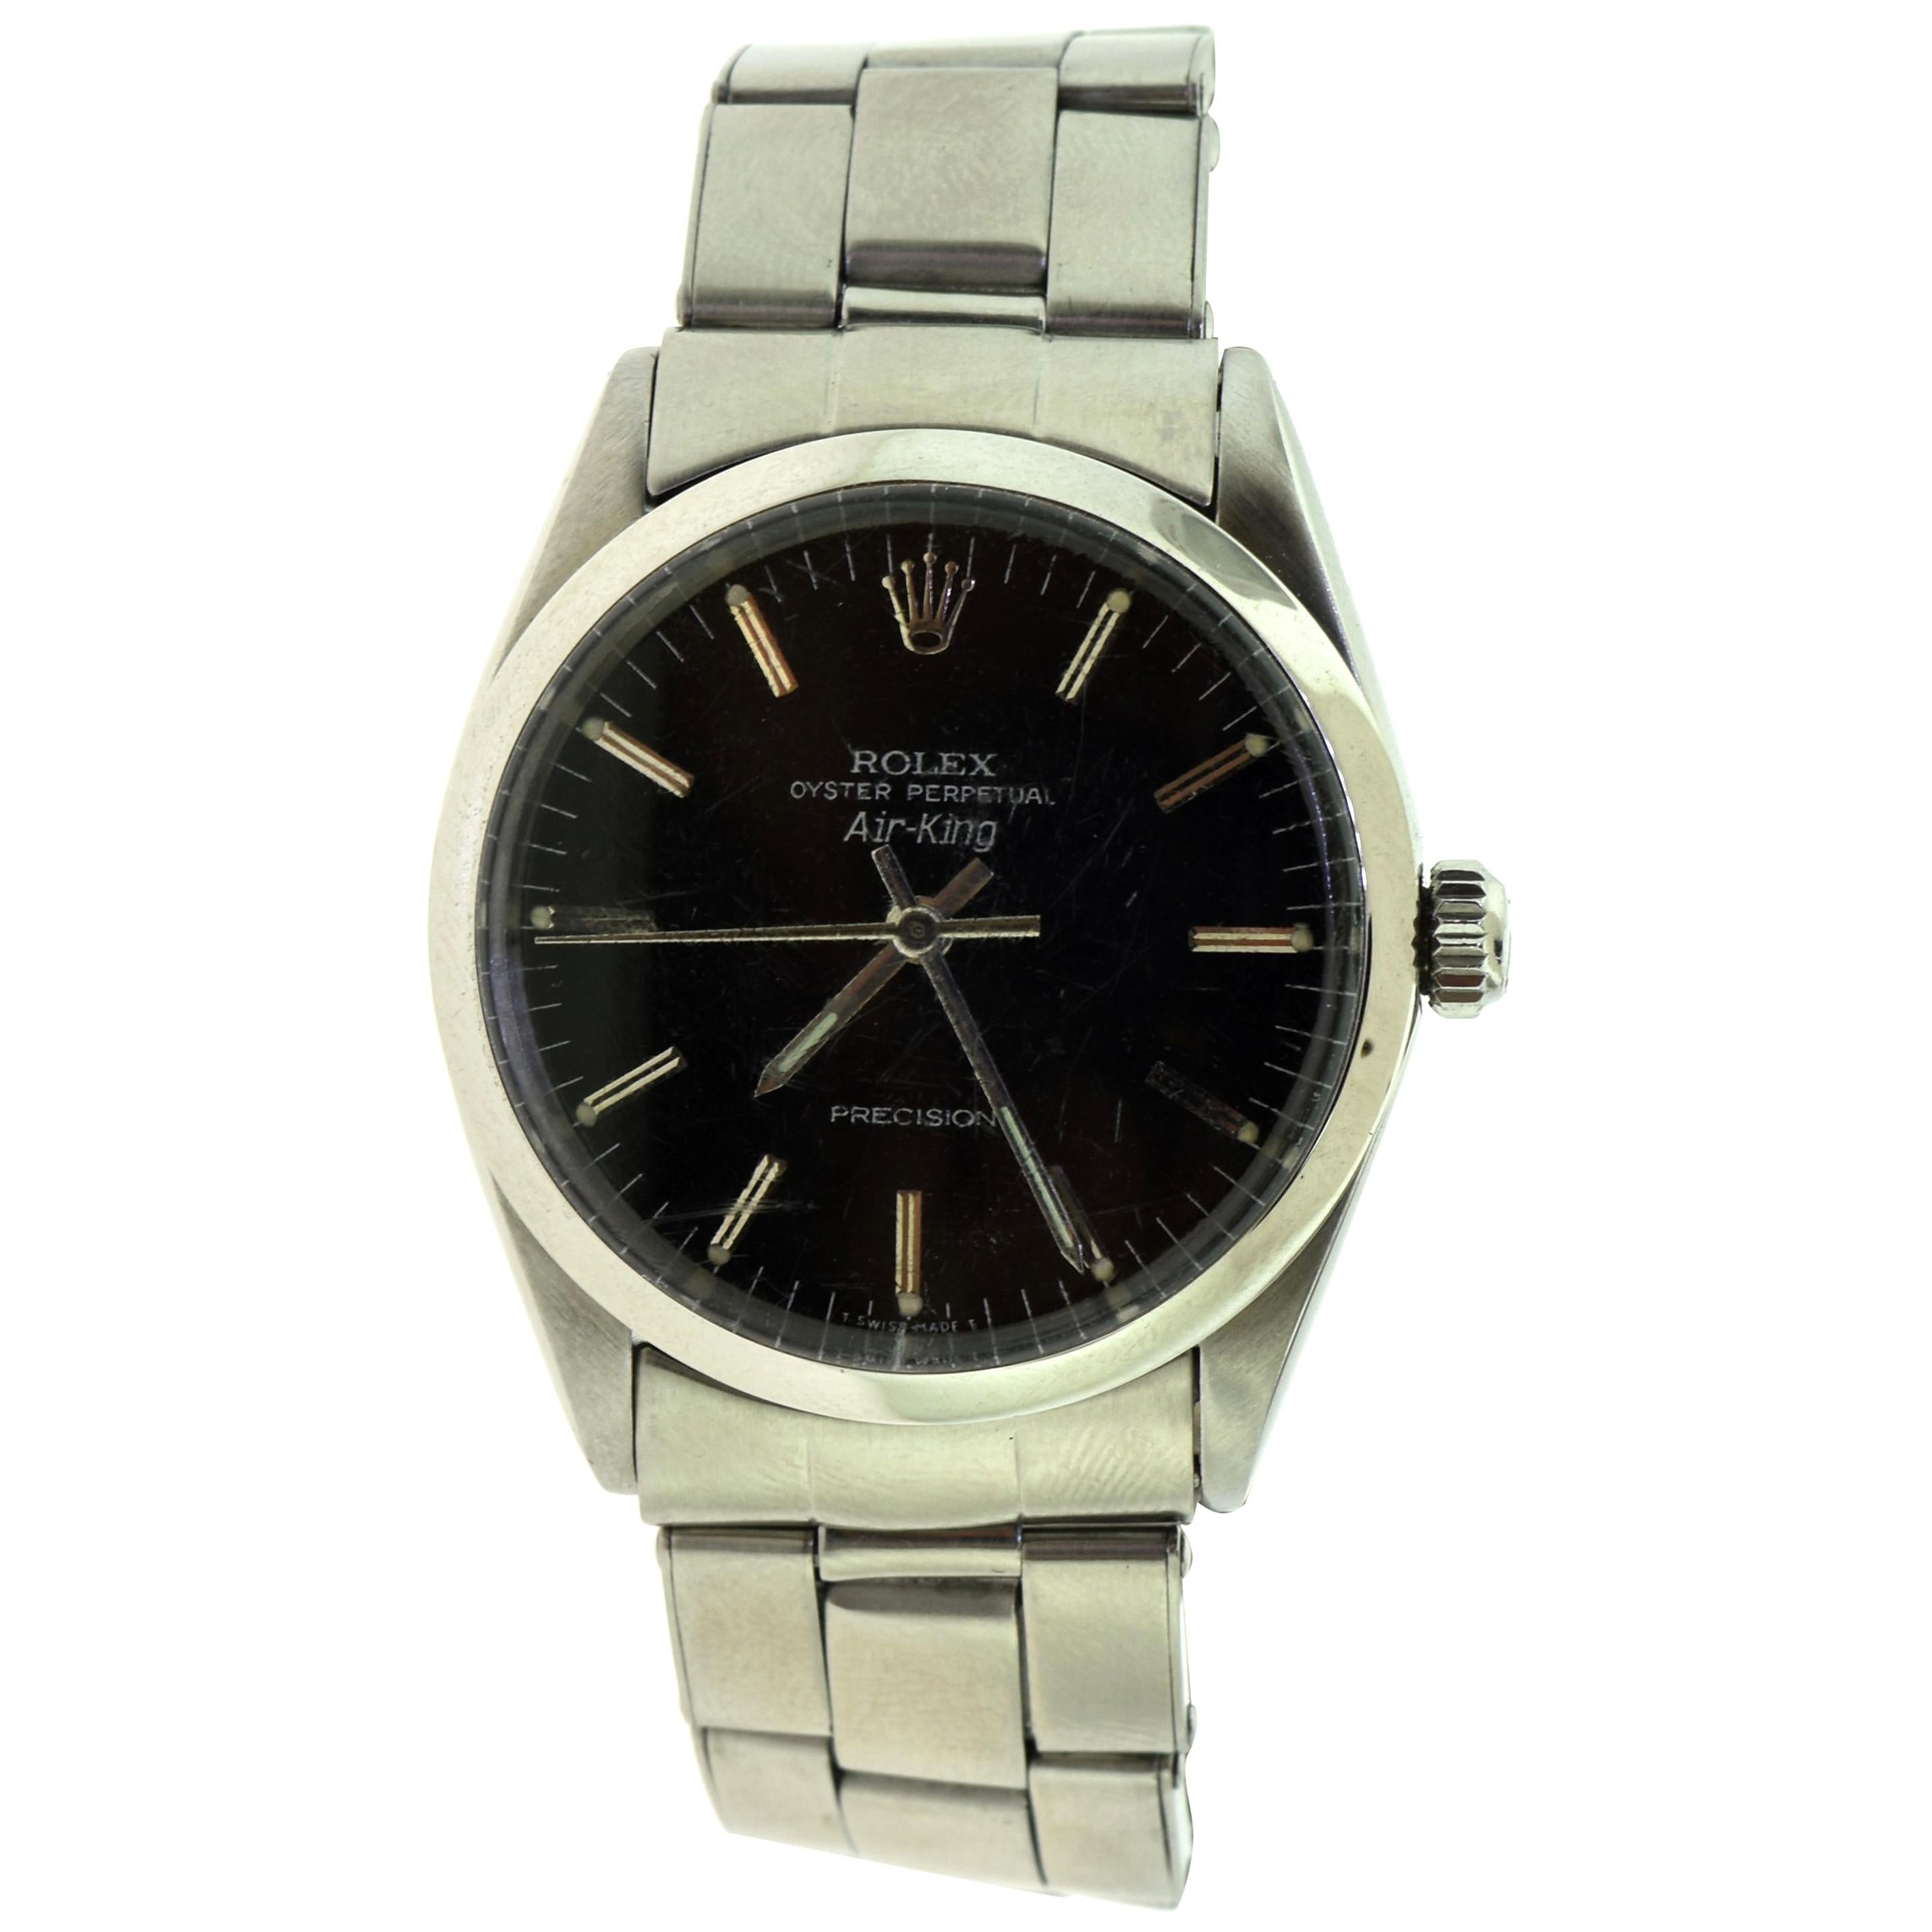 Rolex Airking Ref. 5500 Oyster Perpetual Stainless Steel Black Dial Watch 'R-10'